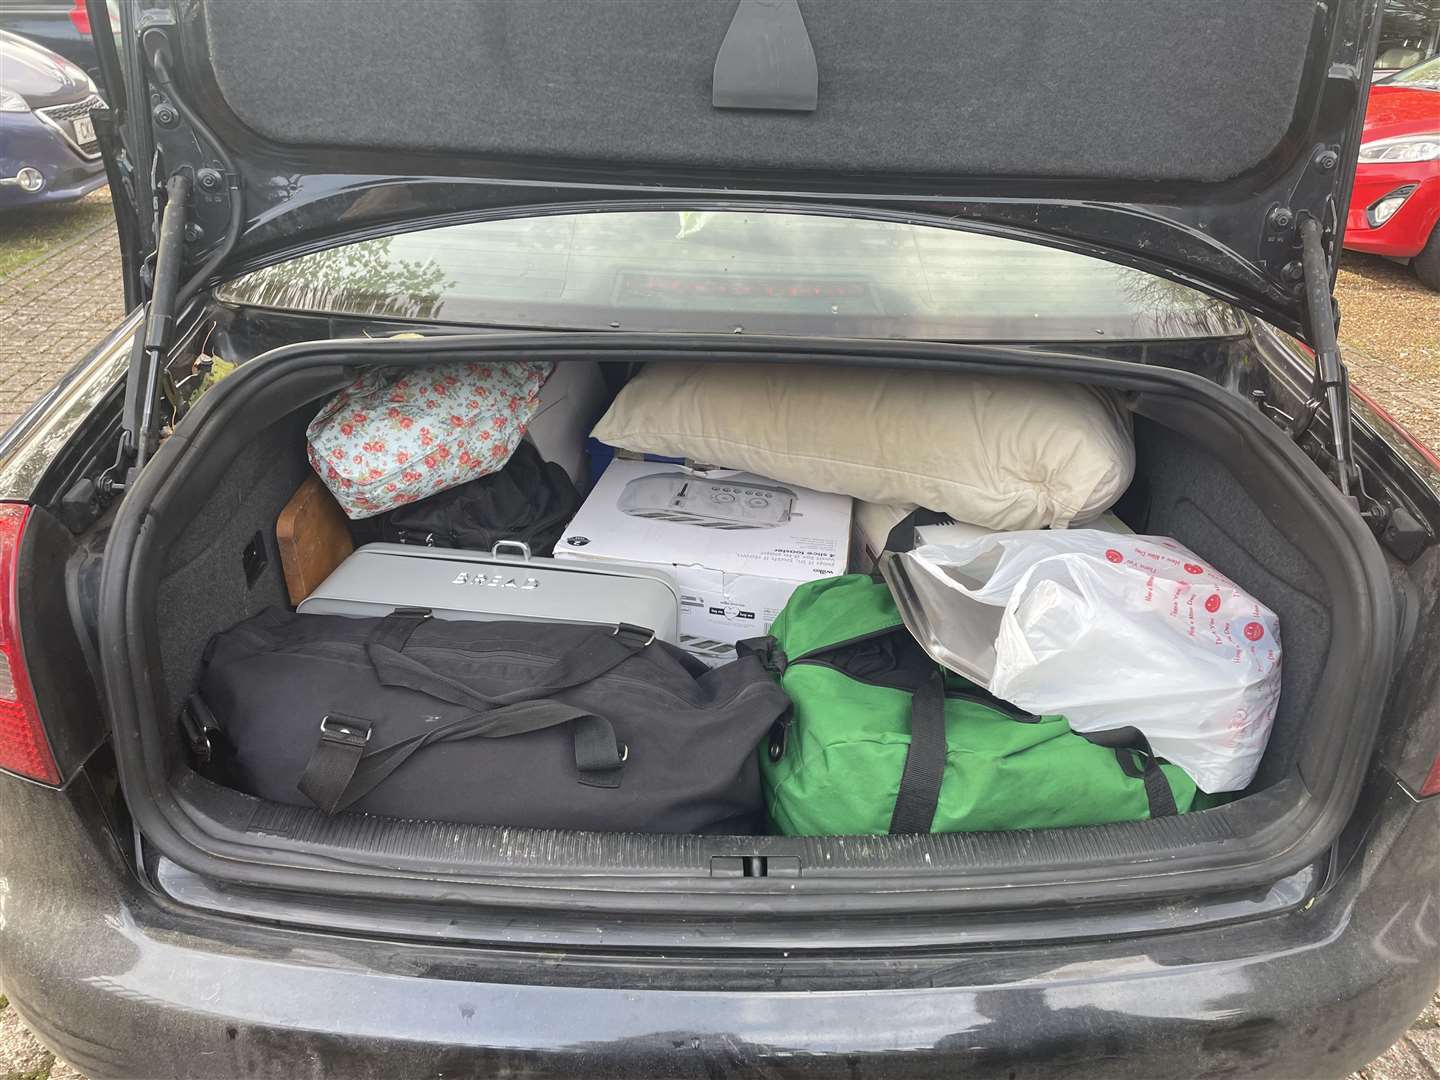 All their belongings were kept in the boot or a storage locker